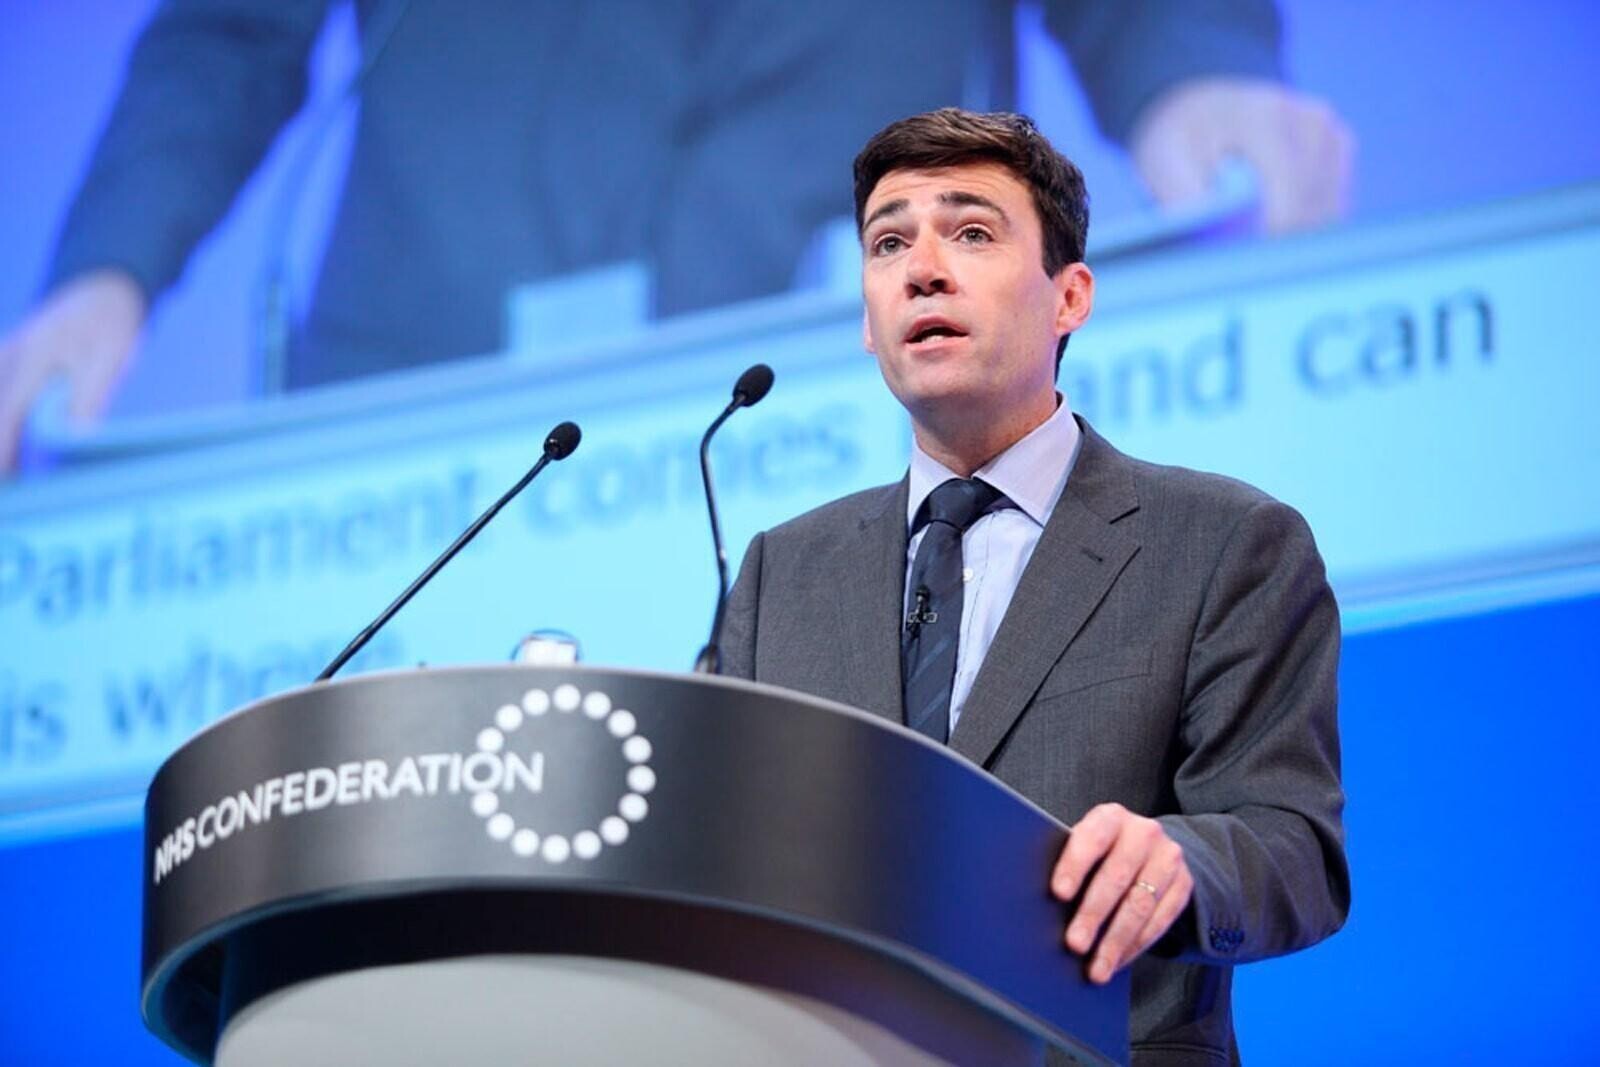 Andy Burnham - greater Manchester mayor and Labour MP